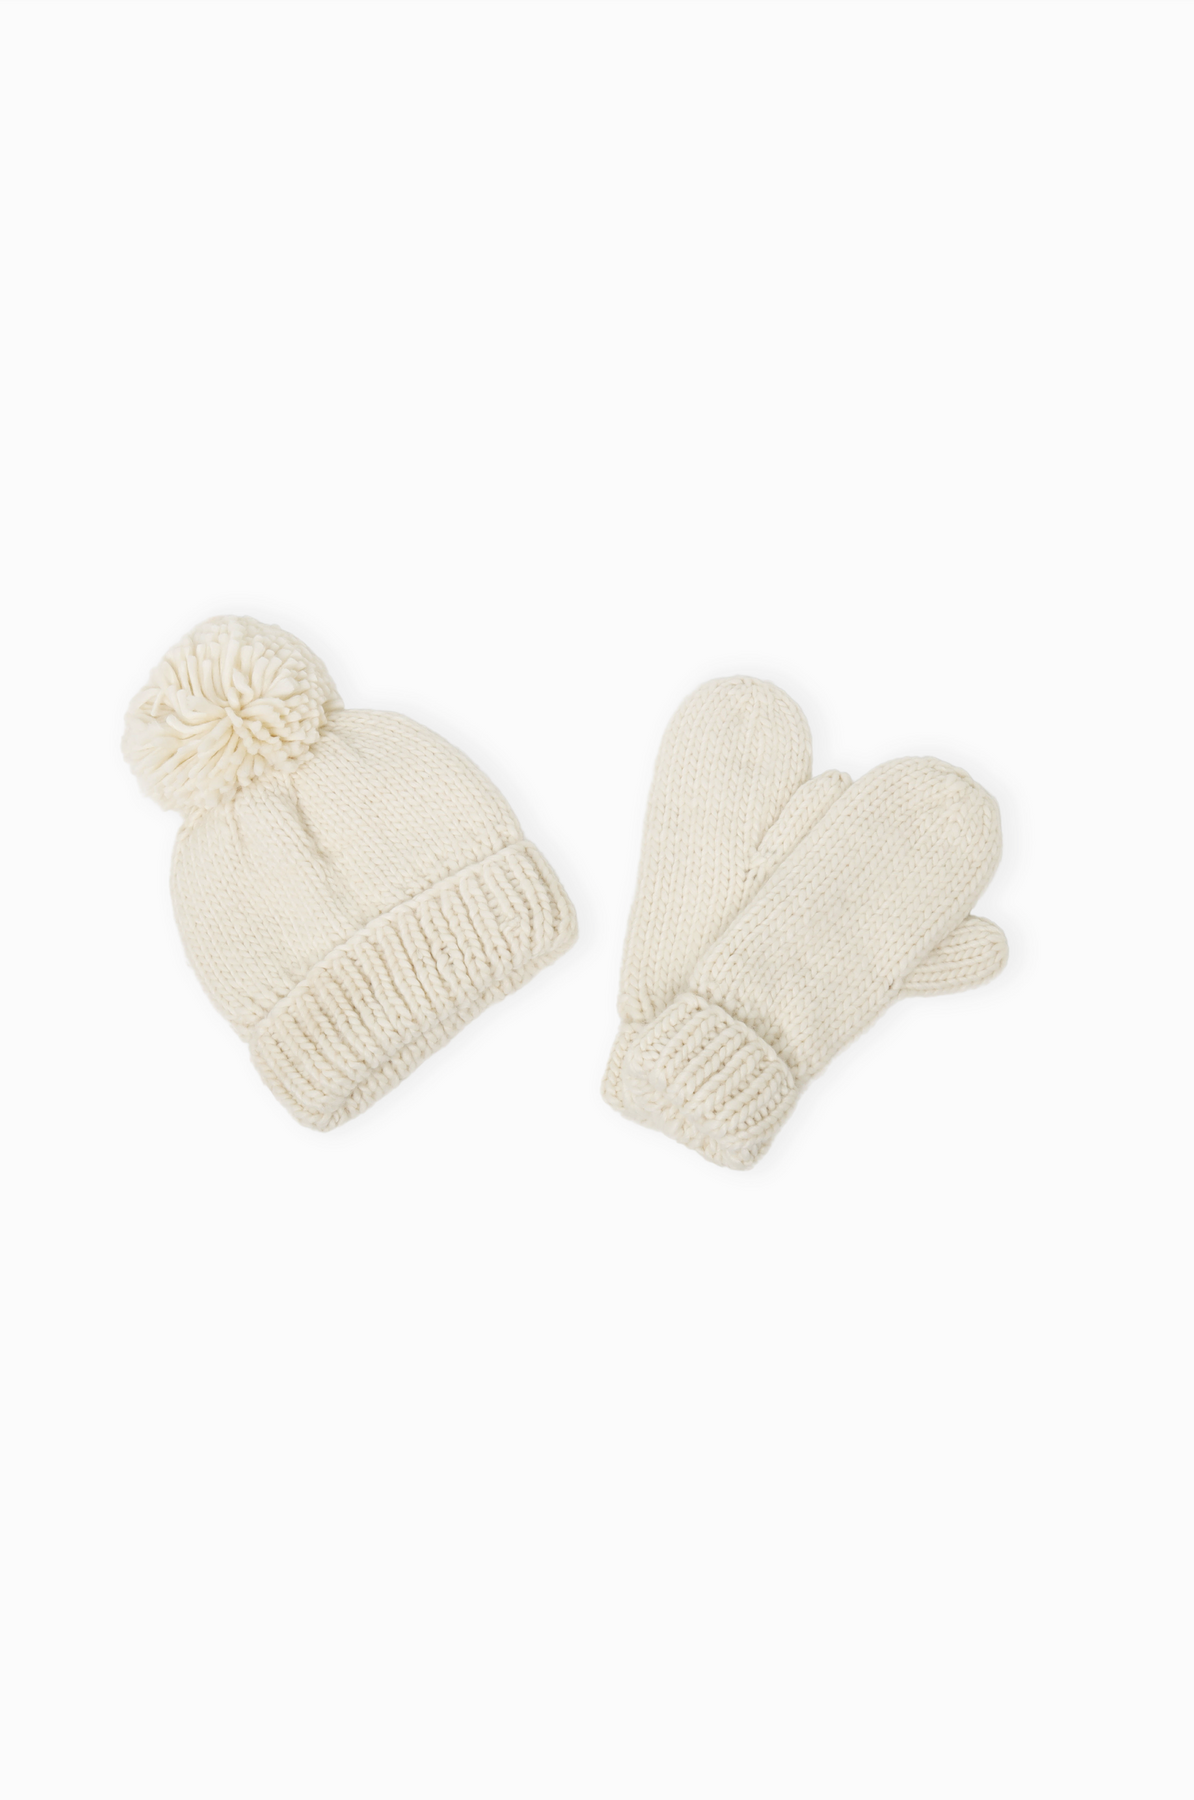 Hand Knit Basic Mittens in Ivory